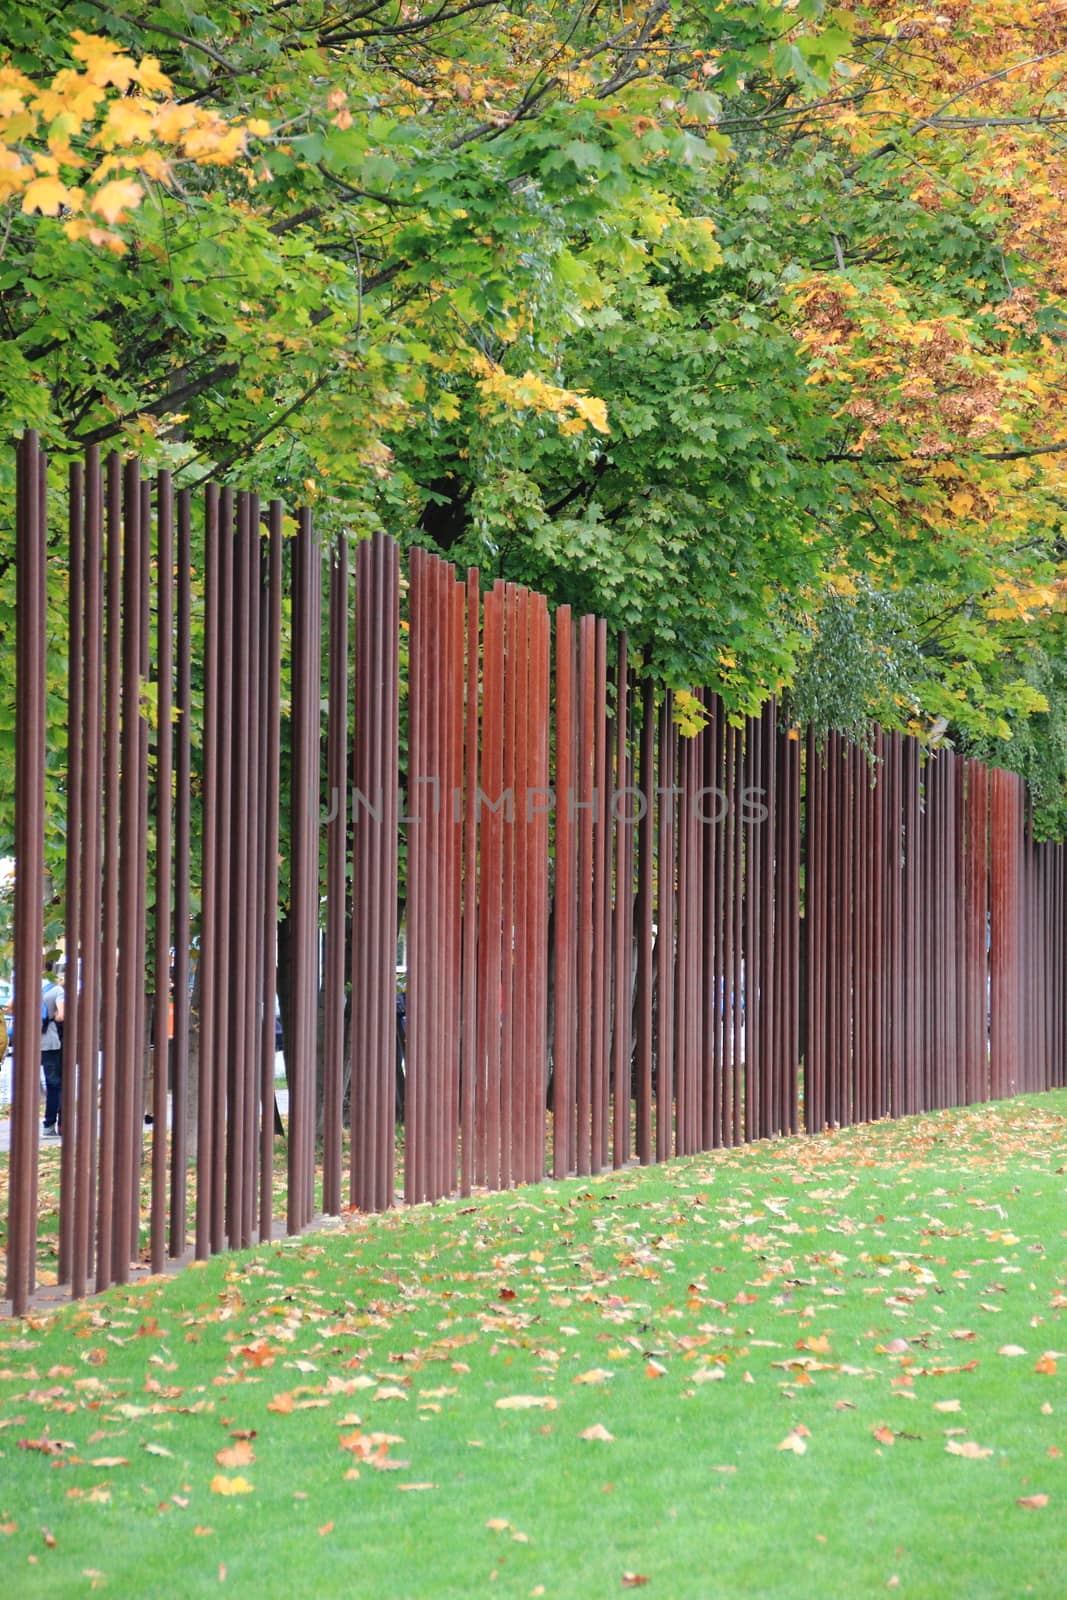 Berlin wall memorial Germany with iron markers in autumn by HoleInTheBox